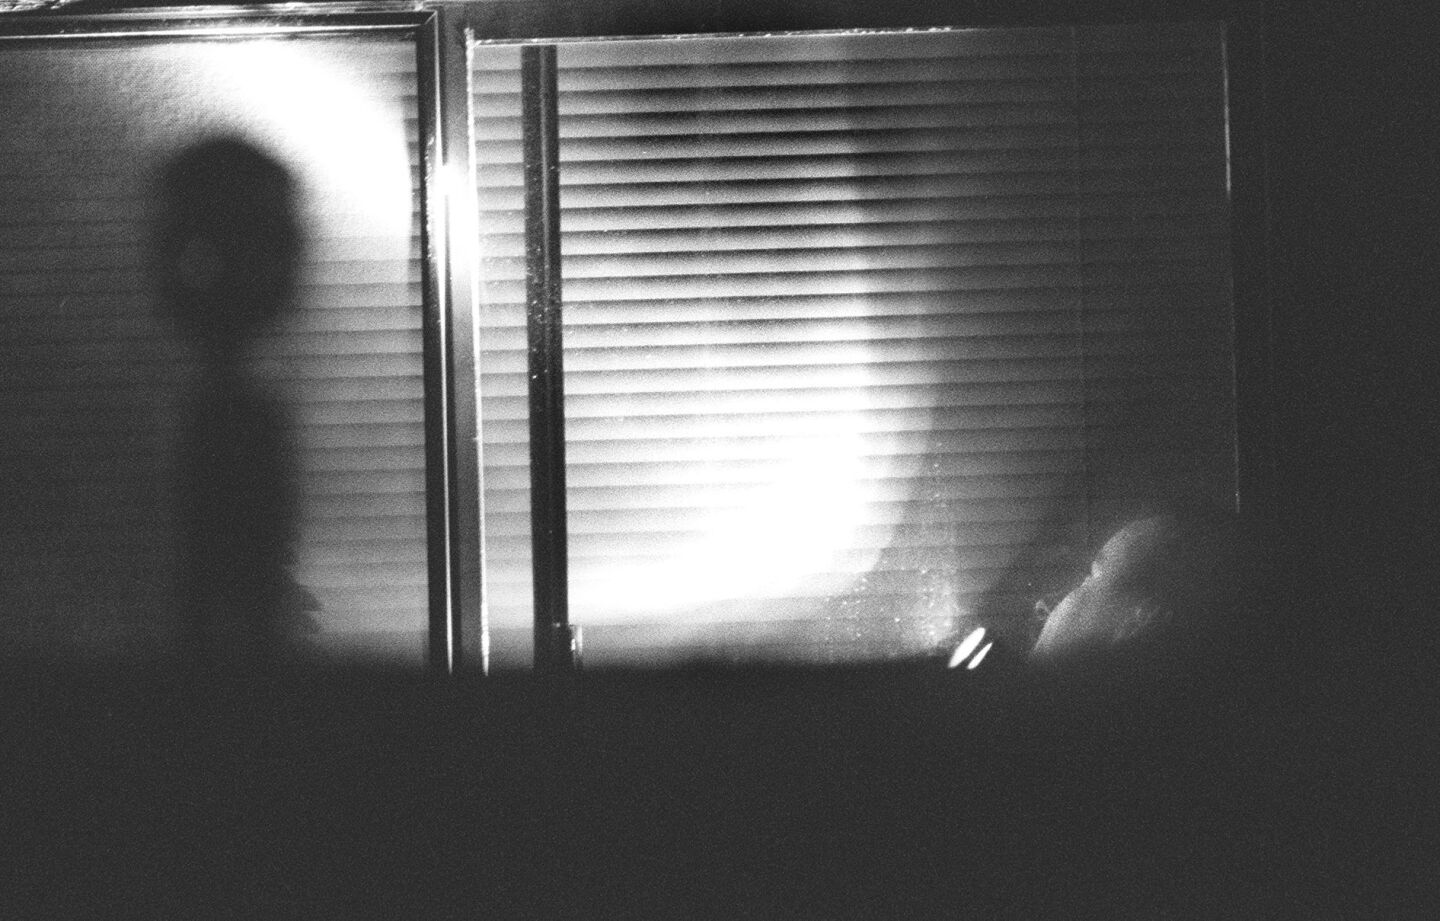 A San Diego County Sheriff's investigator shines a light at a window outside the Rancho Santa Fe mansion where 39 bodies of Heaven's Gate members were found on March 26, 1997.